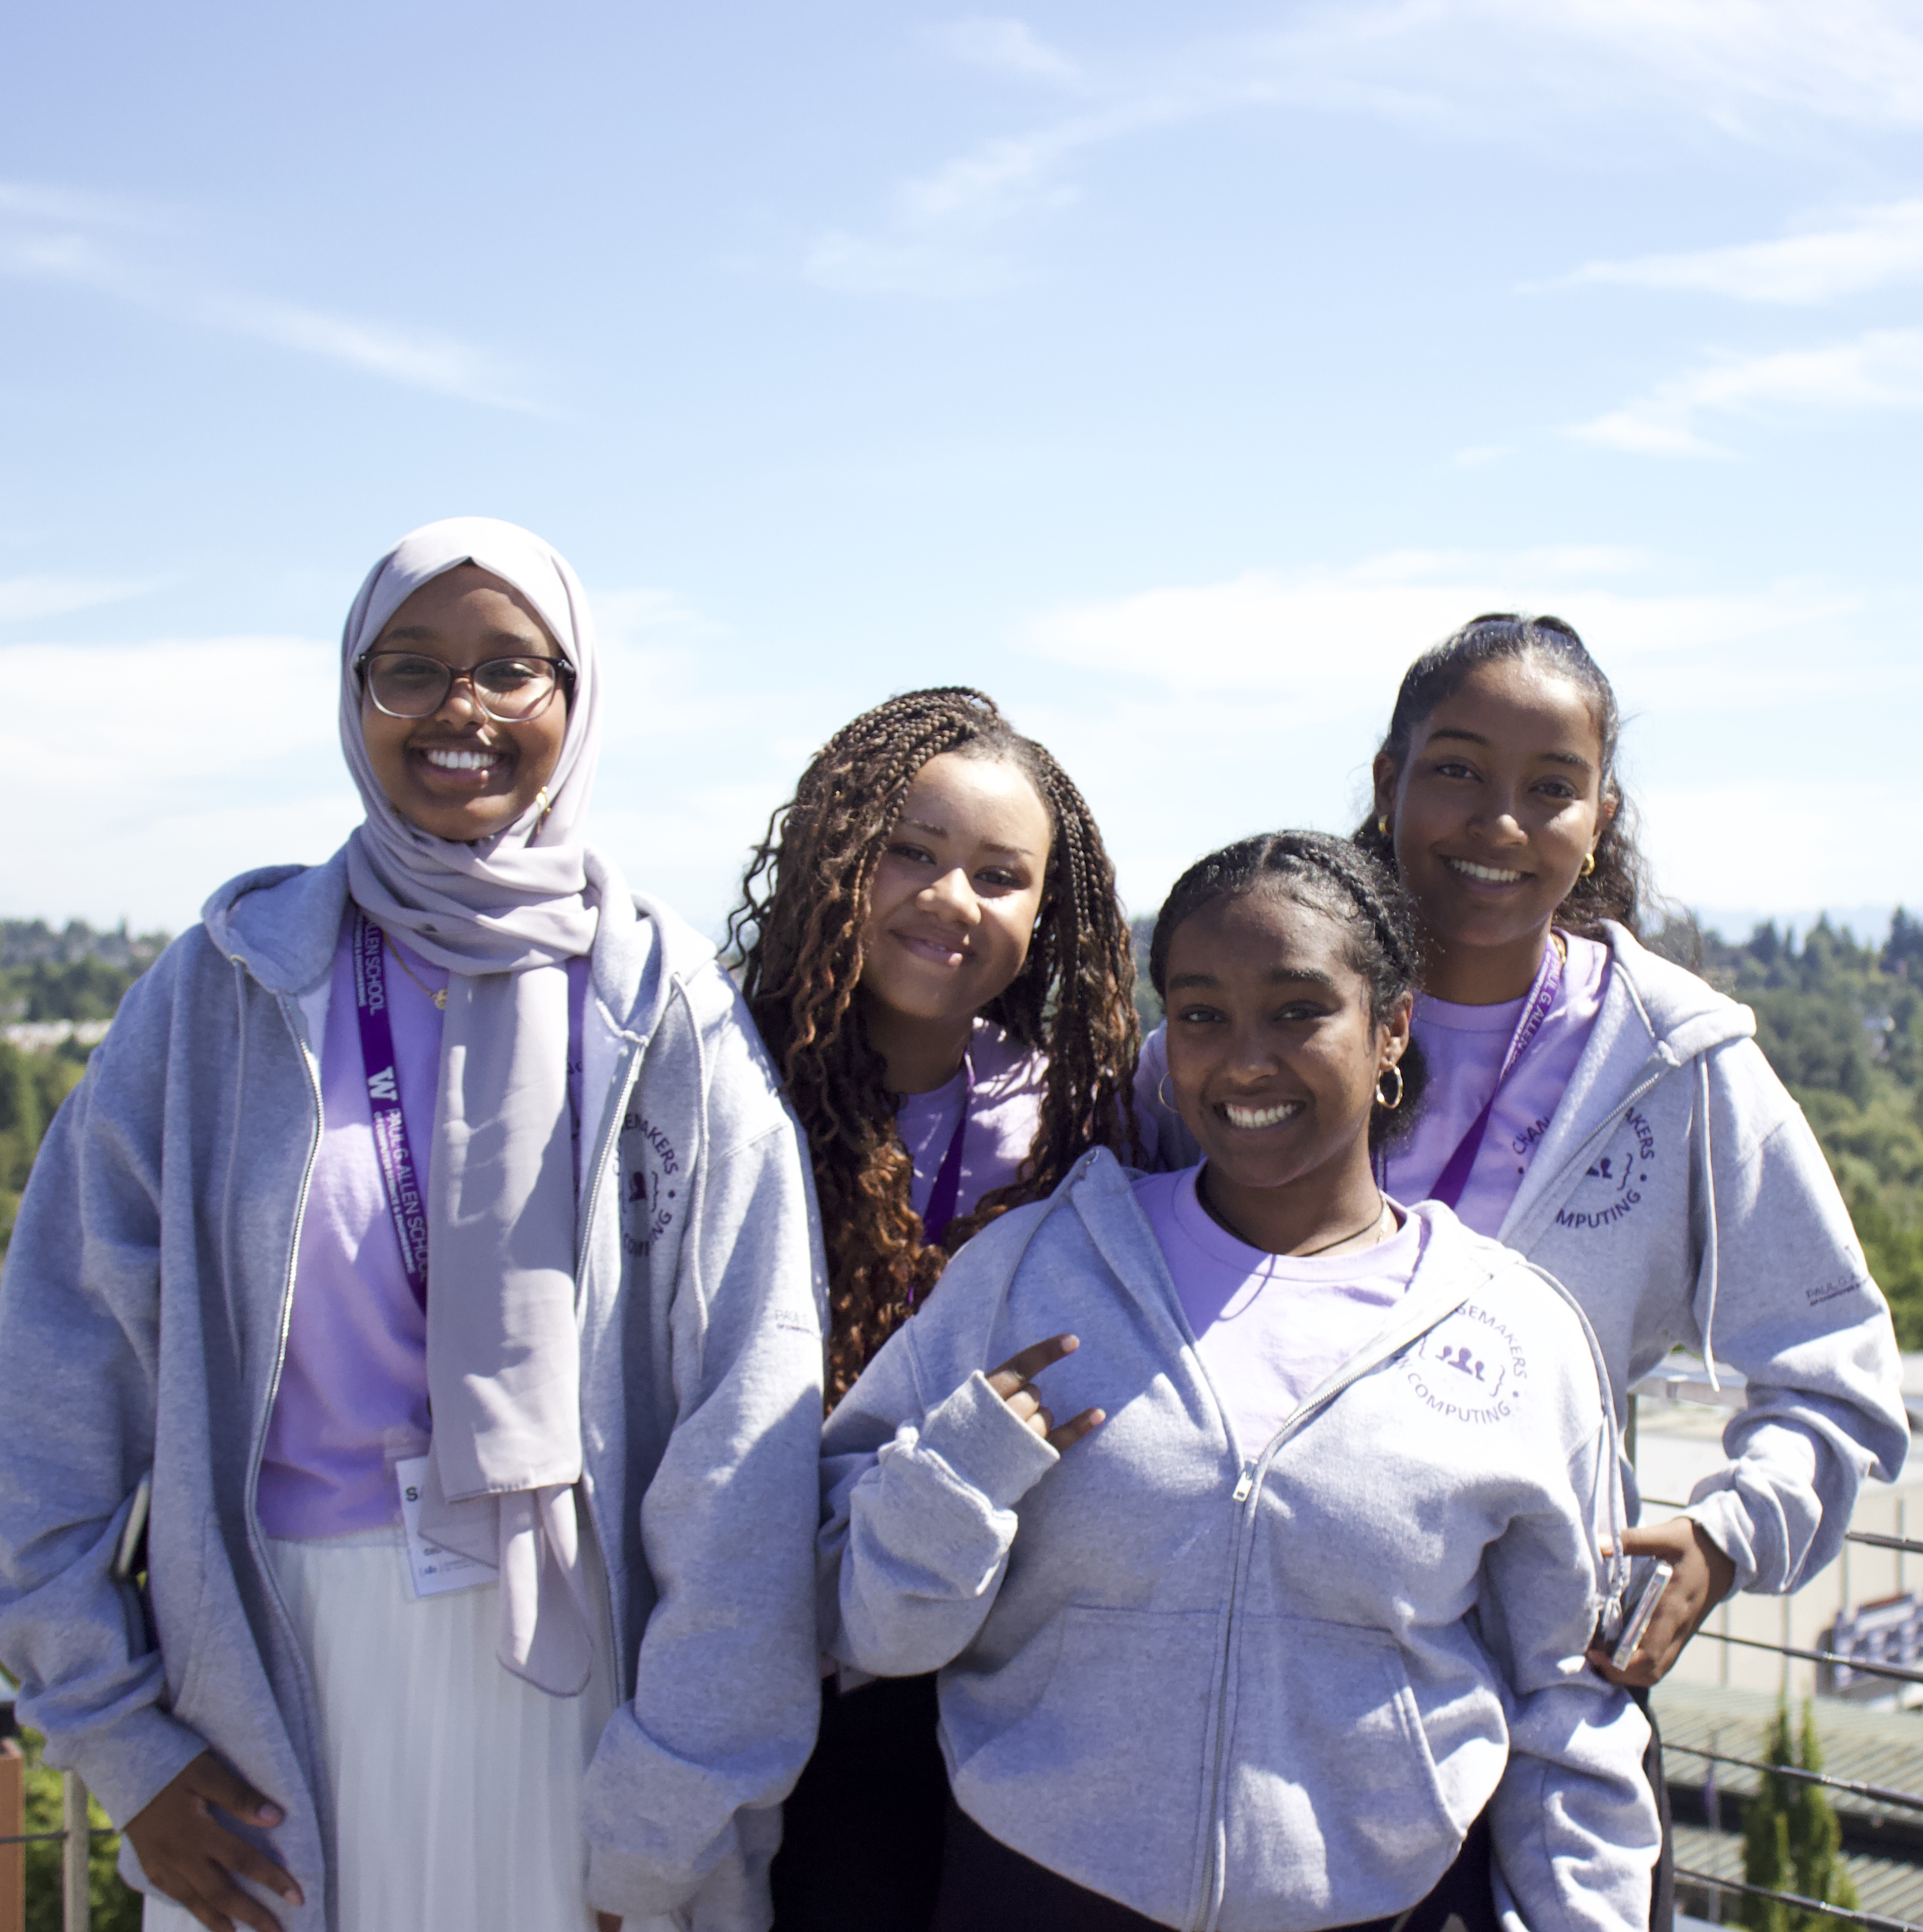 4 students smiling towards the camera with the open sky behind them